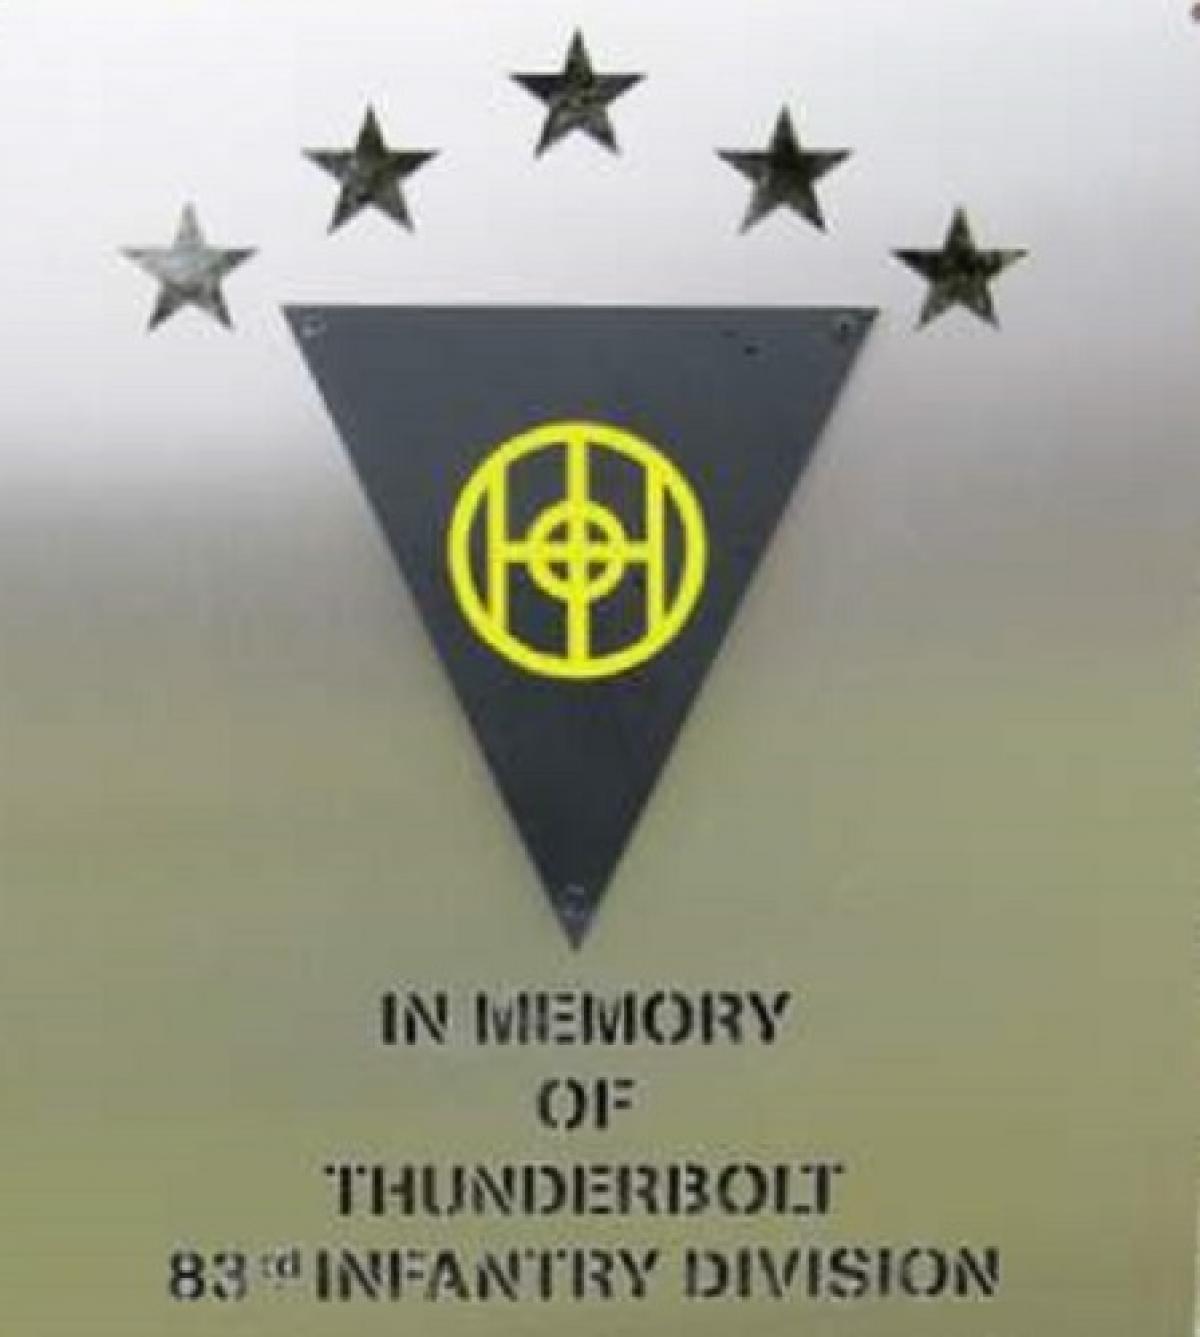 OK, Grove, Headstone Symbols and Meanings, U. S. Army 83rd Infantry Division (Thunderbolt)